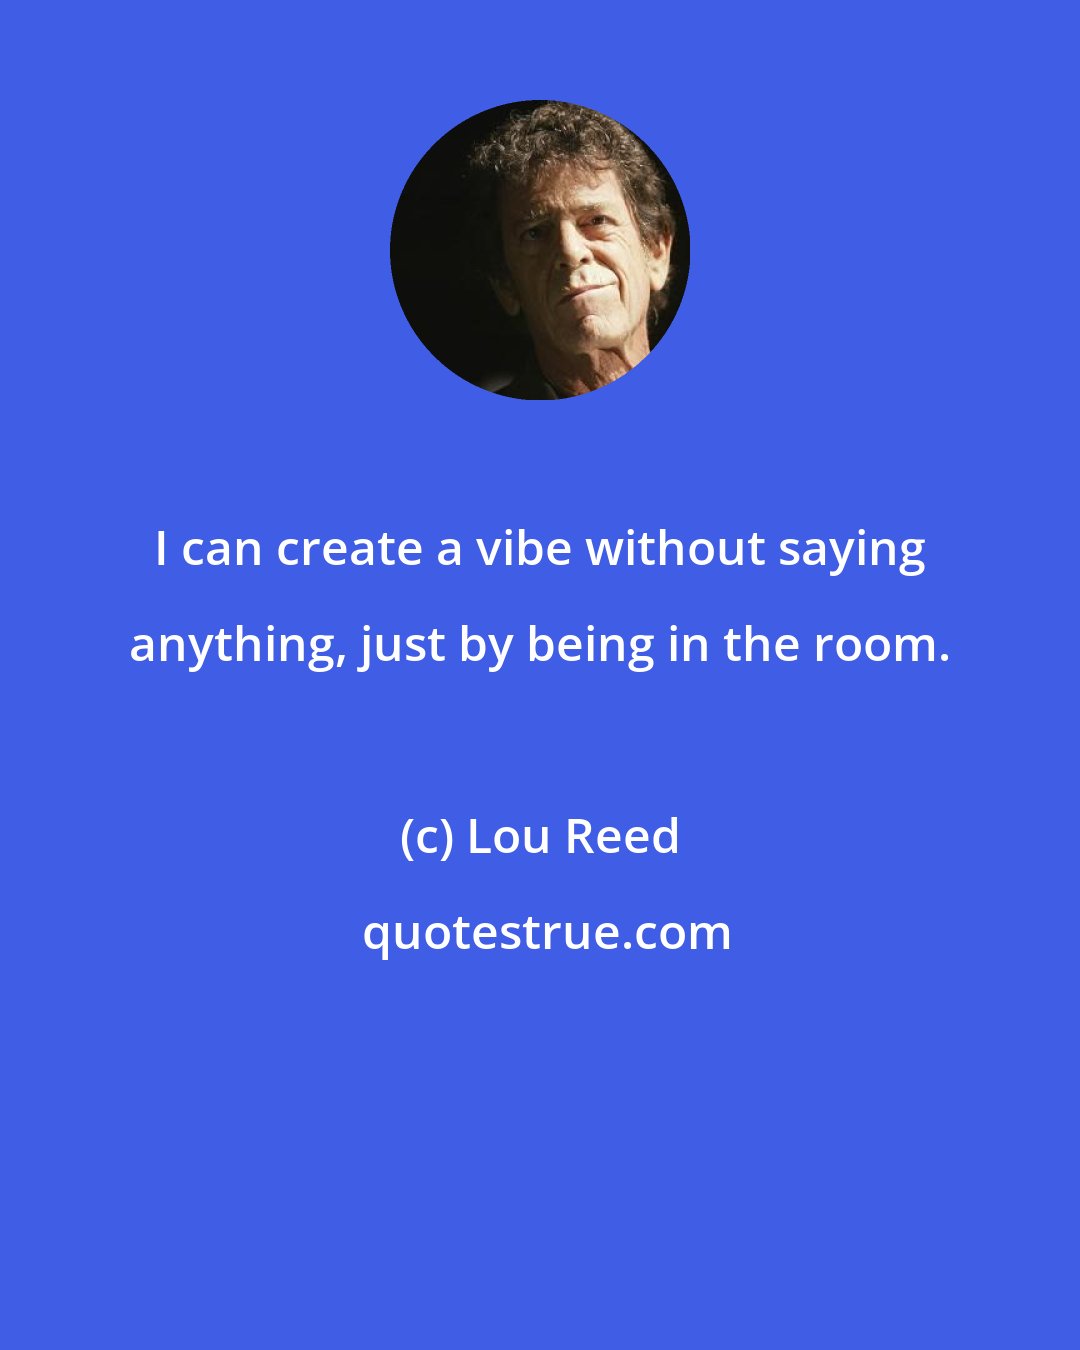 Lou Reed: I can create a vibe without saying anything, just by being in the room.